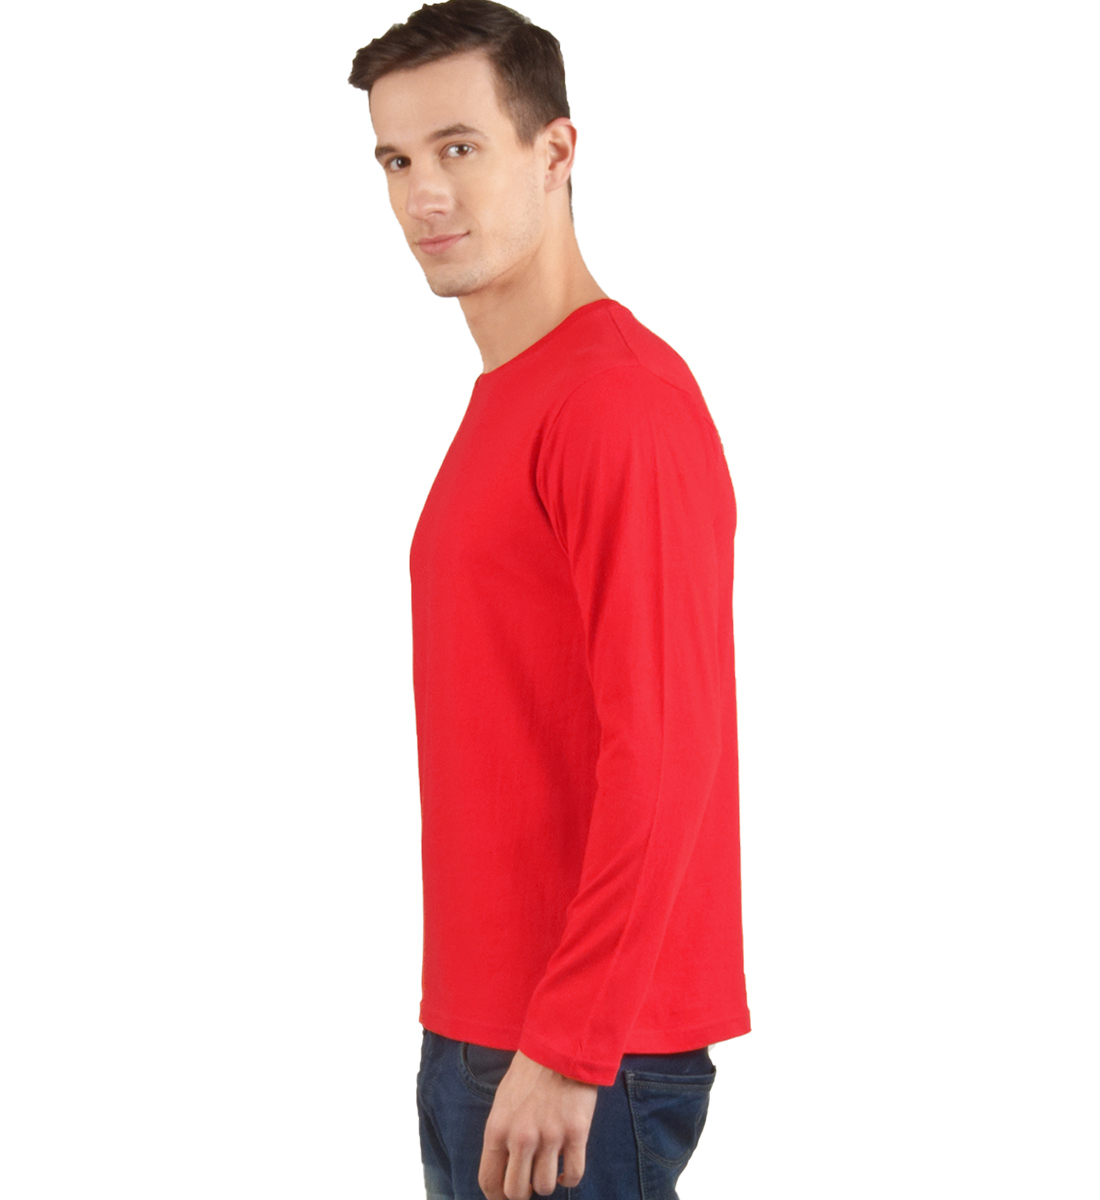 Buy Red Plain T-Shirt Full Sleeves Round Neck Cotton T-Shirt Online ...